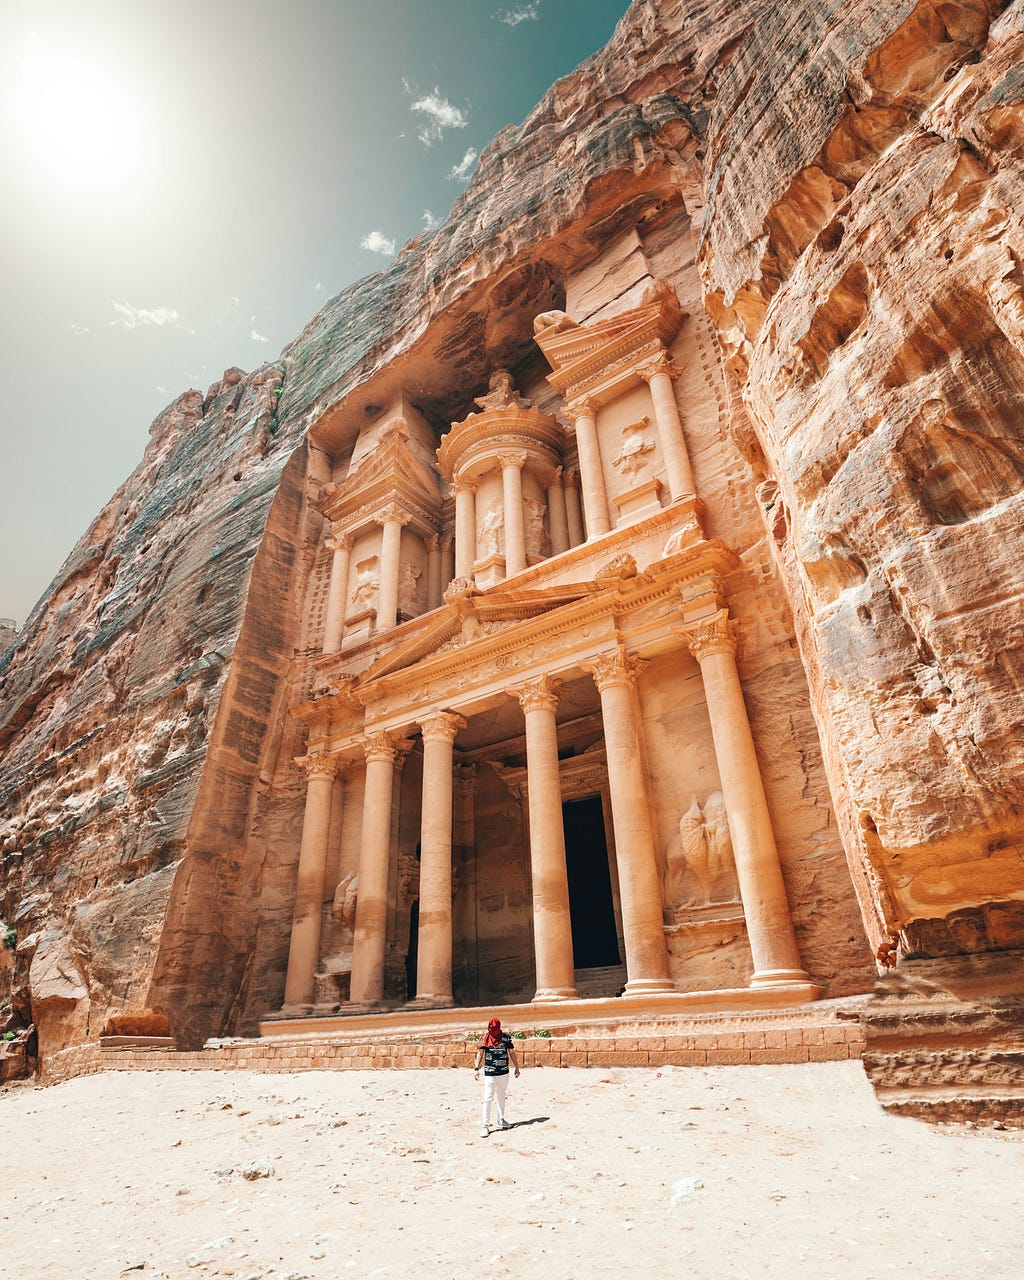 the Petra ruins, with a person standing alone in front of them